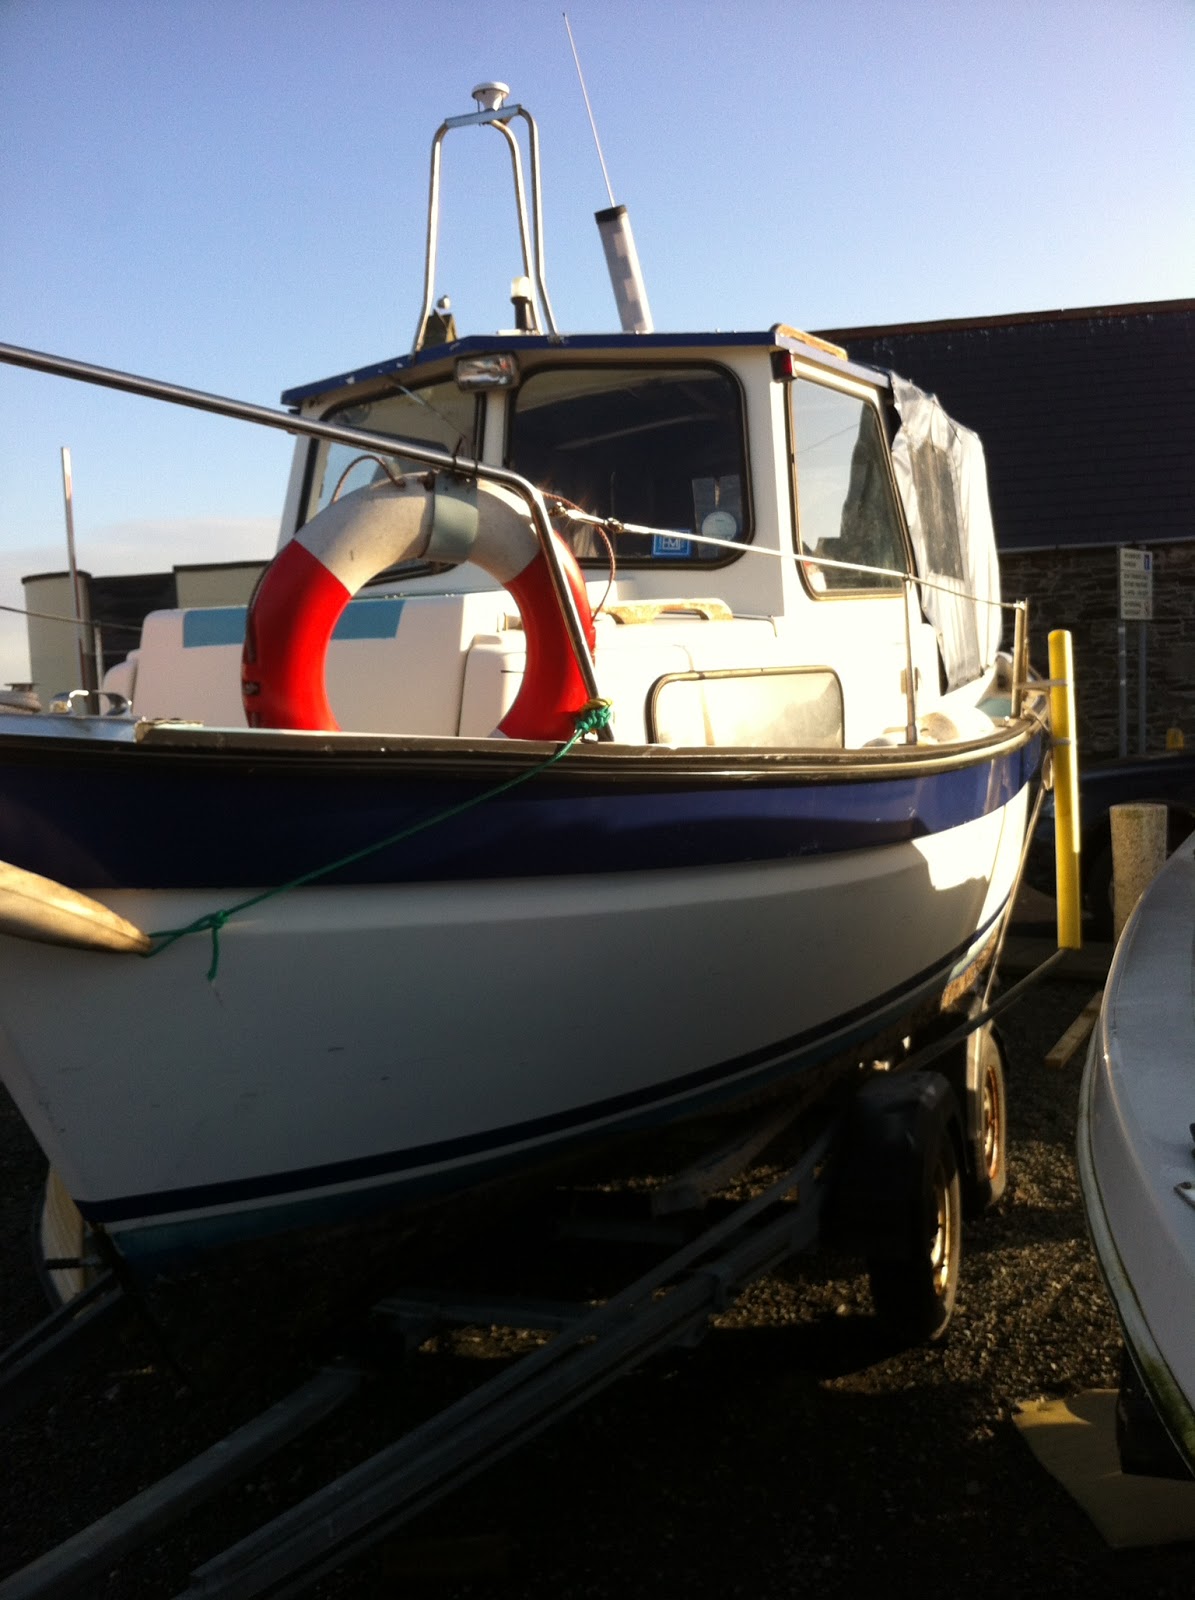 J-Star Marine Services Traditional Boat Builders: Essex's 